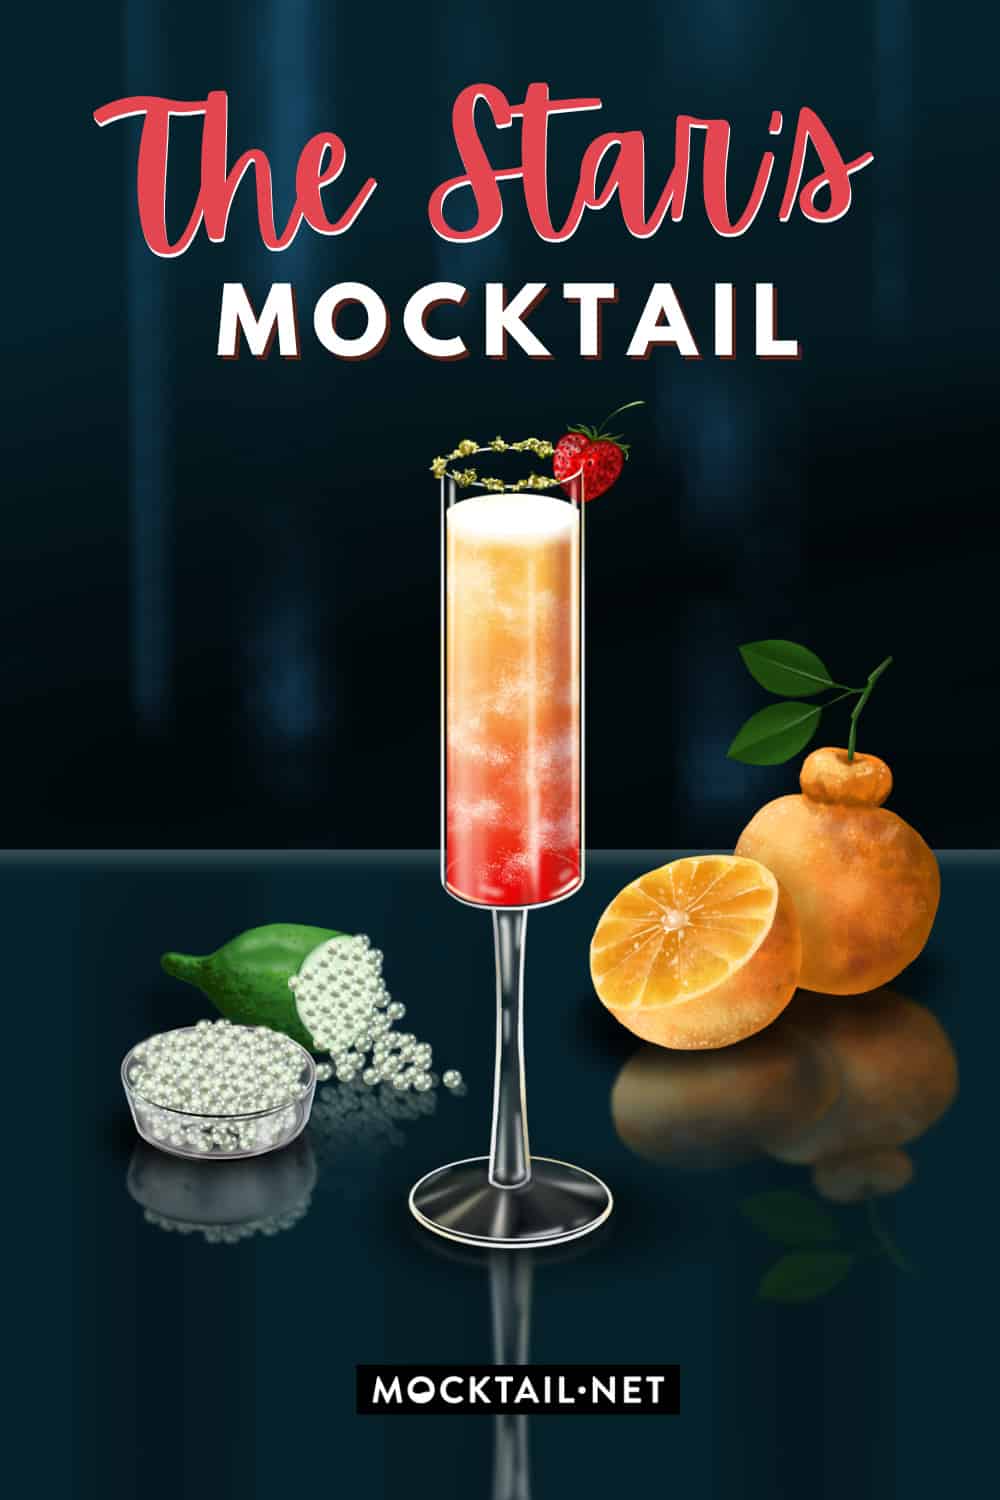 The Star’s Mocktail - The World’s Most Exclusive Mocktail